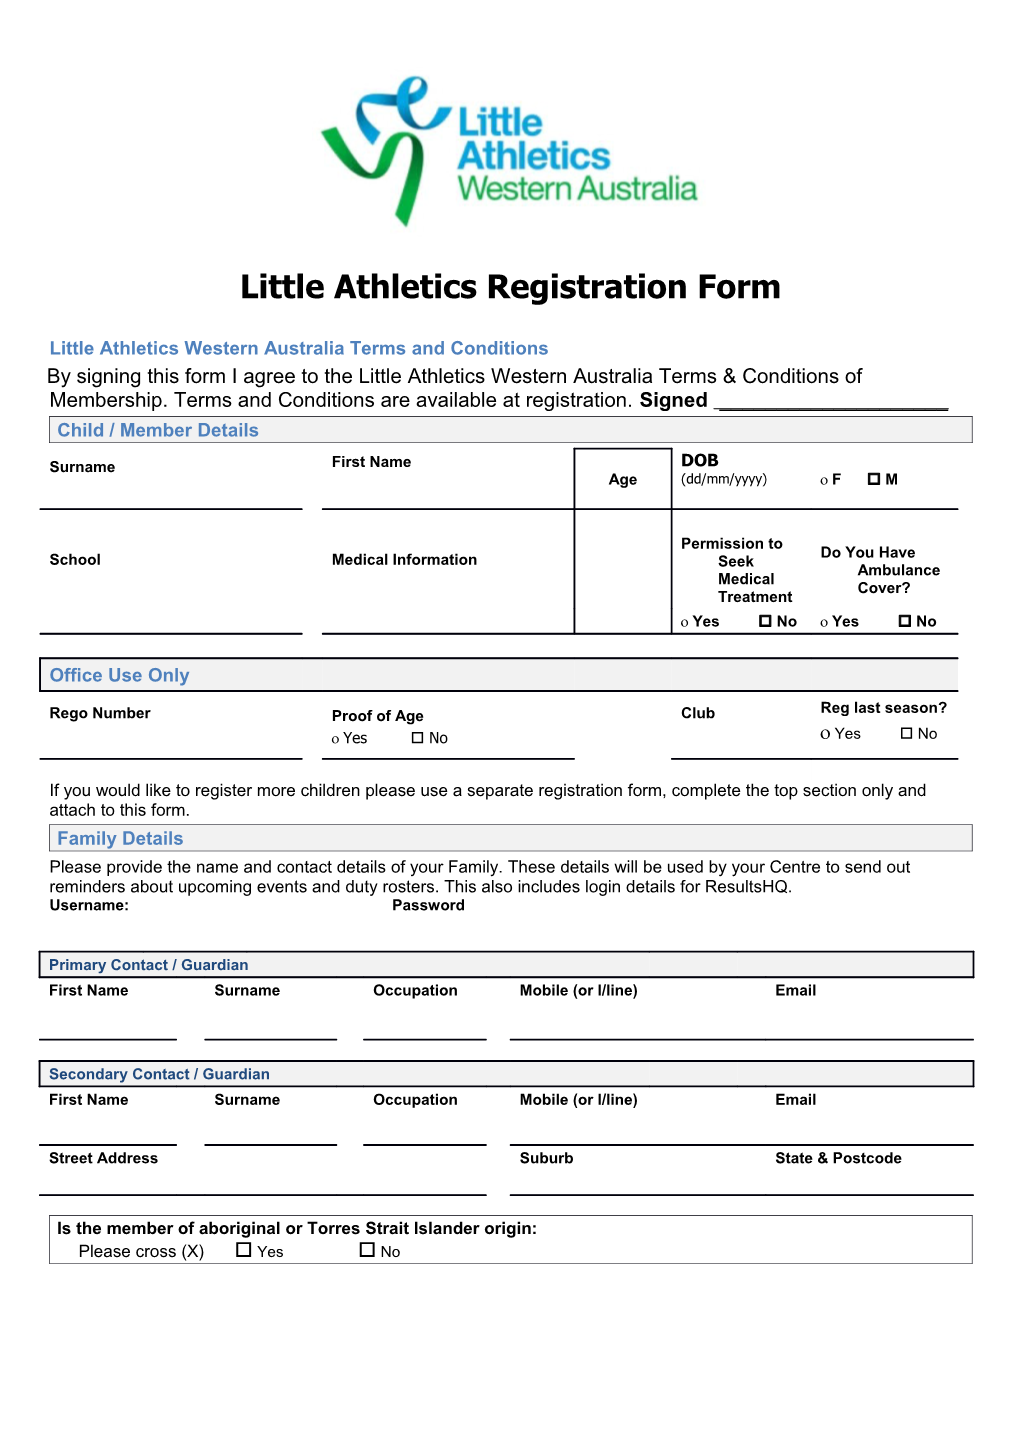 Little Athletics Western Australia Terms and Conditions